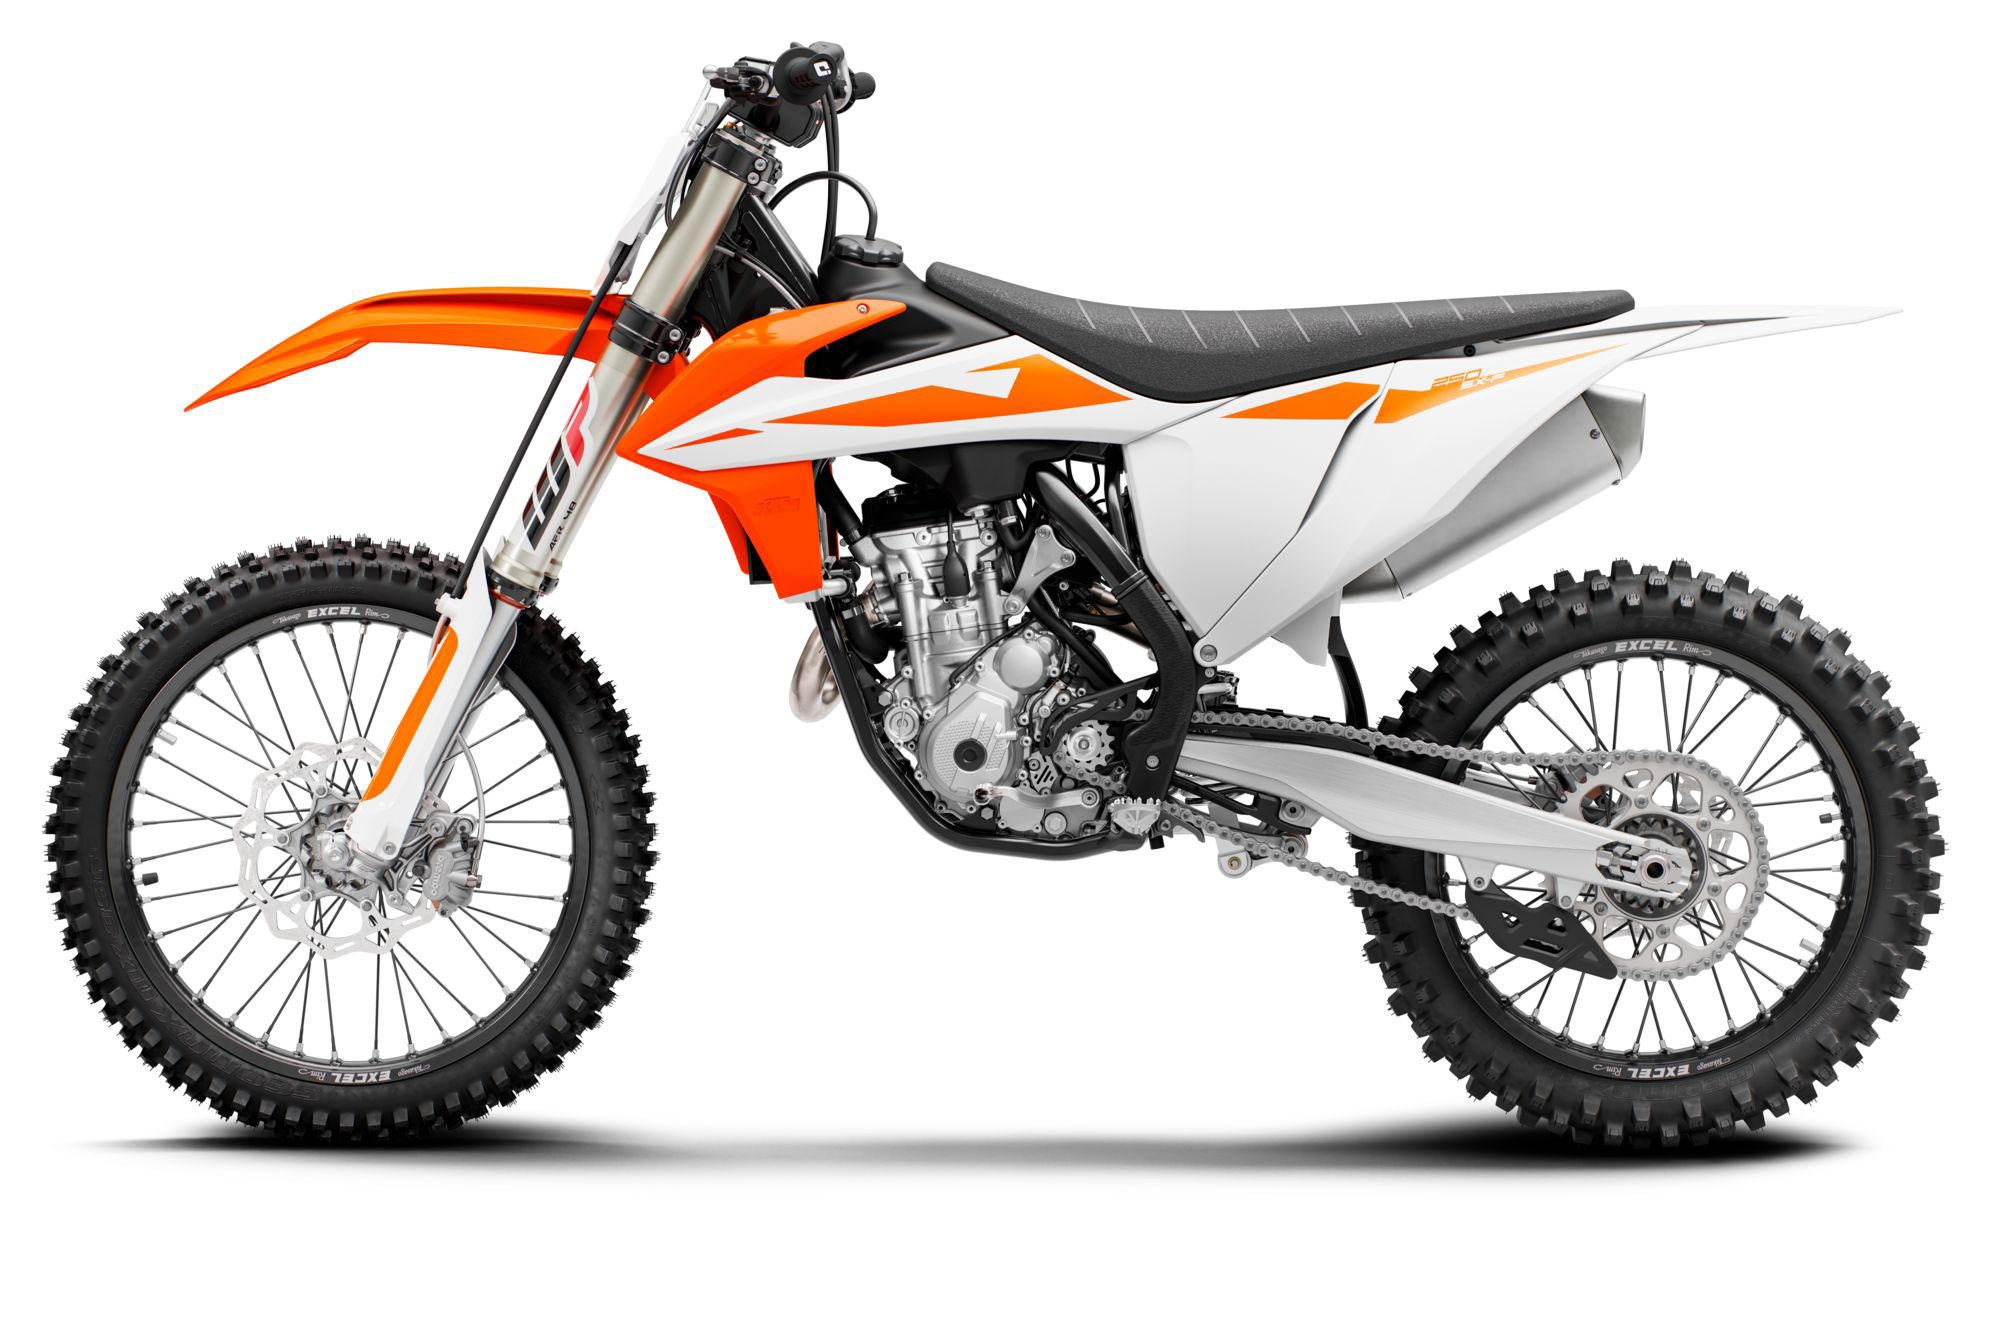 2019 KTM 250 SX-F Guide • Total Motorcycle